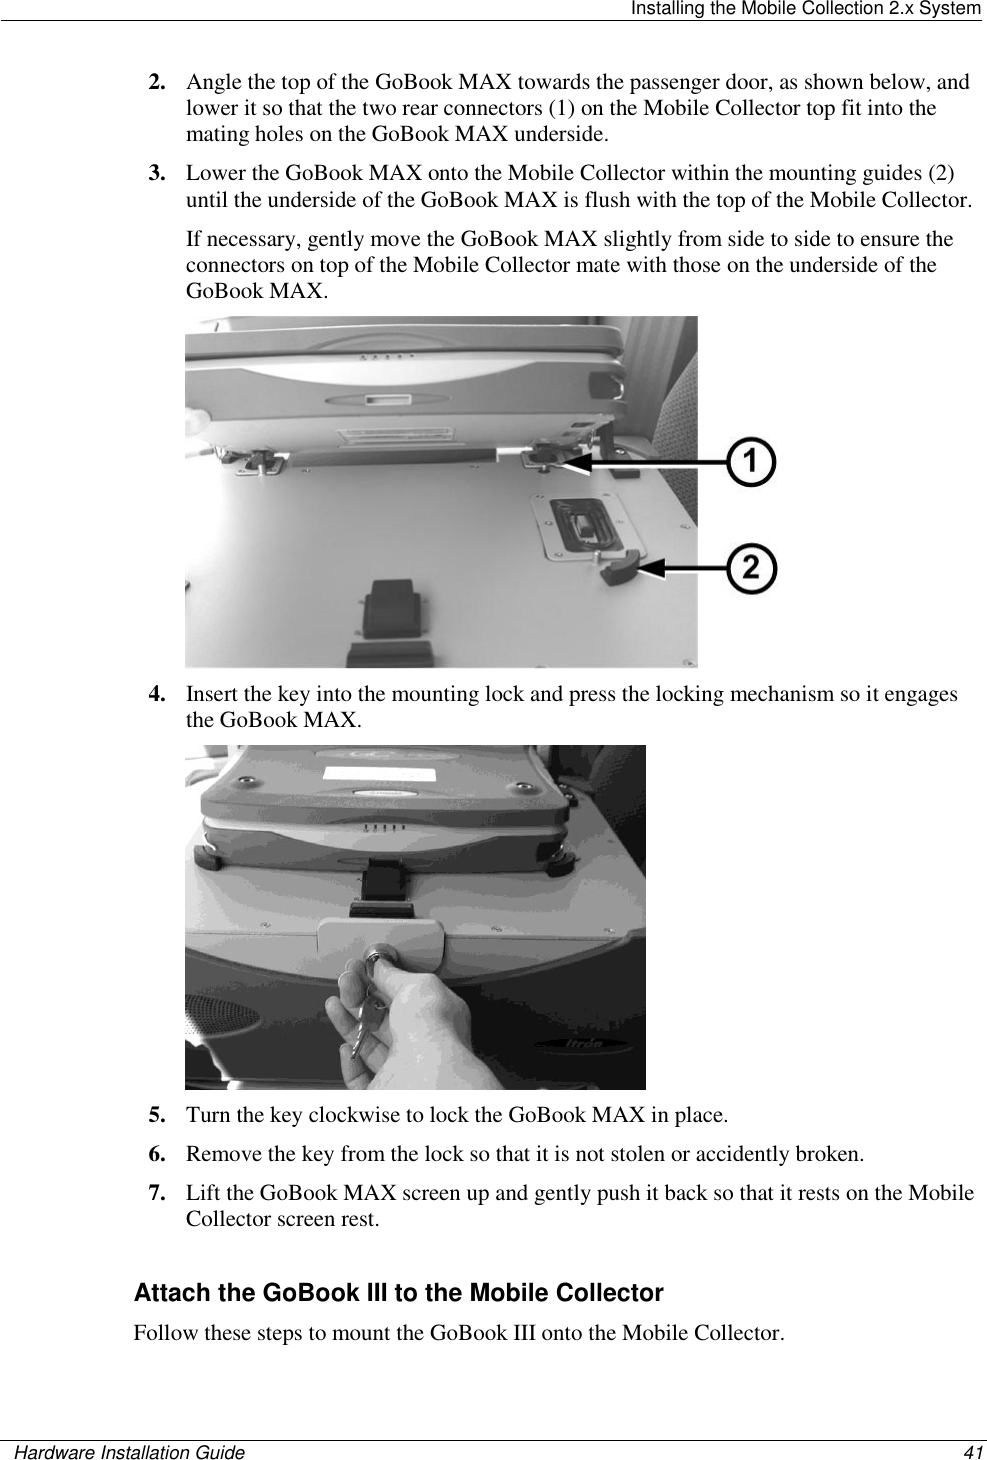   Installing the Mobile Collection 2.x System    Hardware Installation Guide  41  2. Angle the top of the GoBook MAX towards the passenger door, as shown below, and lower it so that the two rear connectors (1) on the Mobile Collector top fit into the mating holes on the GoBook MAX underside. 3. Lower the GoBook MAX onto the Mobile Collector within the mounting guides (2) until the underside of the GoBook MAX is flush with the top of the Mobile Collector.  If necessary, gently move the GoBook MAX slightly from side to side to ensure the connectors on top of the Mobile Collector mate with those on the underside of the GoBook MAX.  4. Insert the key into the mounting lock and press the locking mechanism so it engages the GoBook MAX.  5. Turn the key clockwise to lock the GoBook MAX in place. 6. Remove the key from the lock so that it is not stolen or accidently broken. 7. Lift the GoBook MAX screen up and gently push it back so that it rests on the Mobile Collector screen rest.  Attach the GoBook III to the Mobile Collector Follow these steps to mount the GoBook III onto the Mobile Collector. 